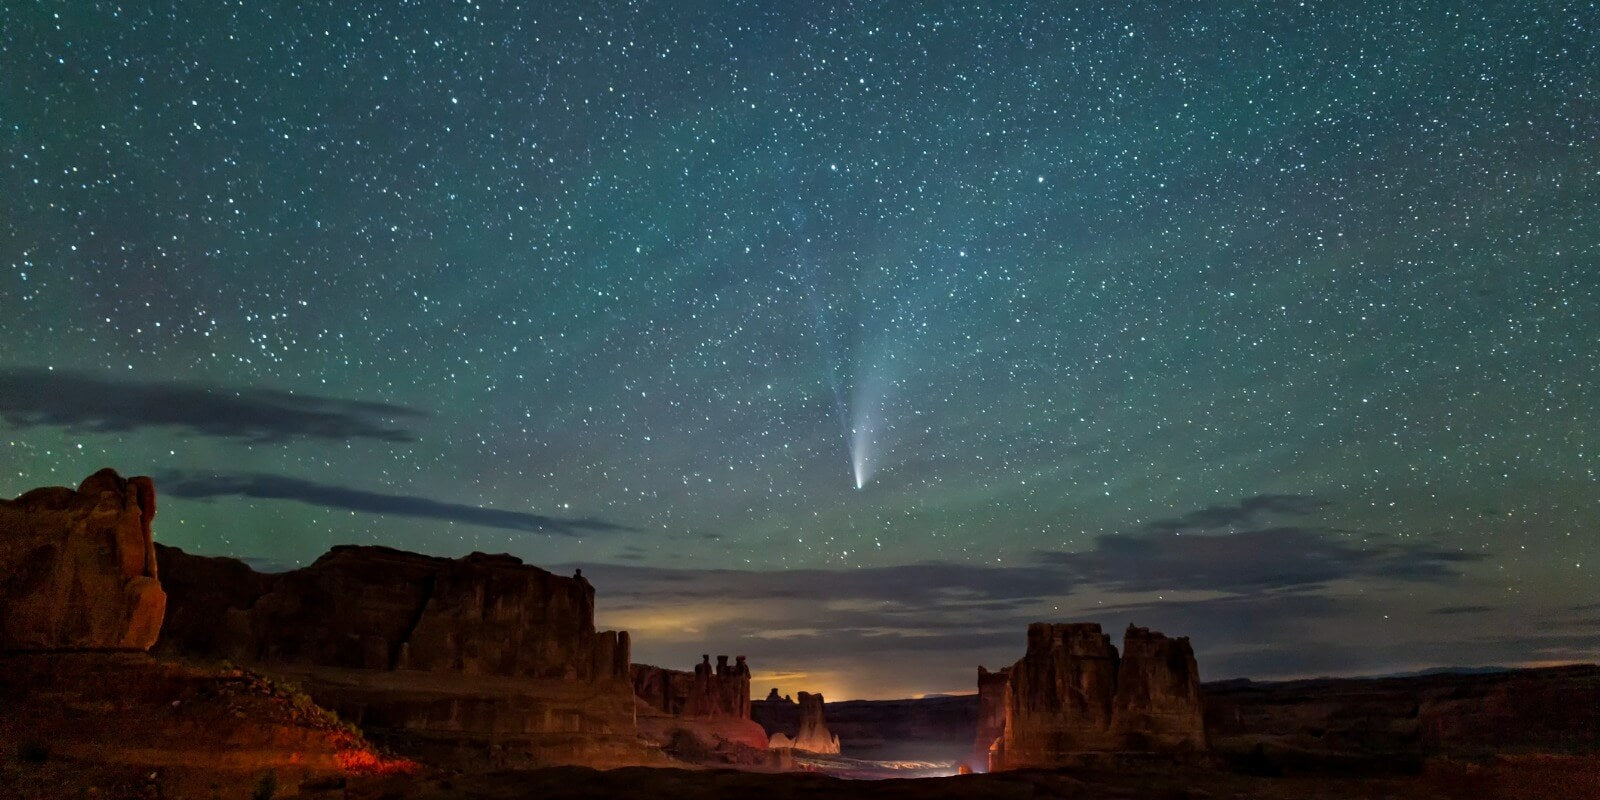 Neowise C2020 F3 Comet silhouetted against the Courthouse Towers valley from the La Sal Mountains Viewpoint in Arches National Park in Moab, Utah.